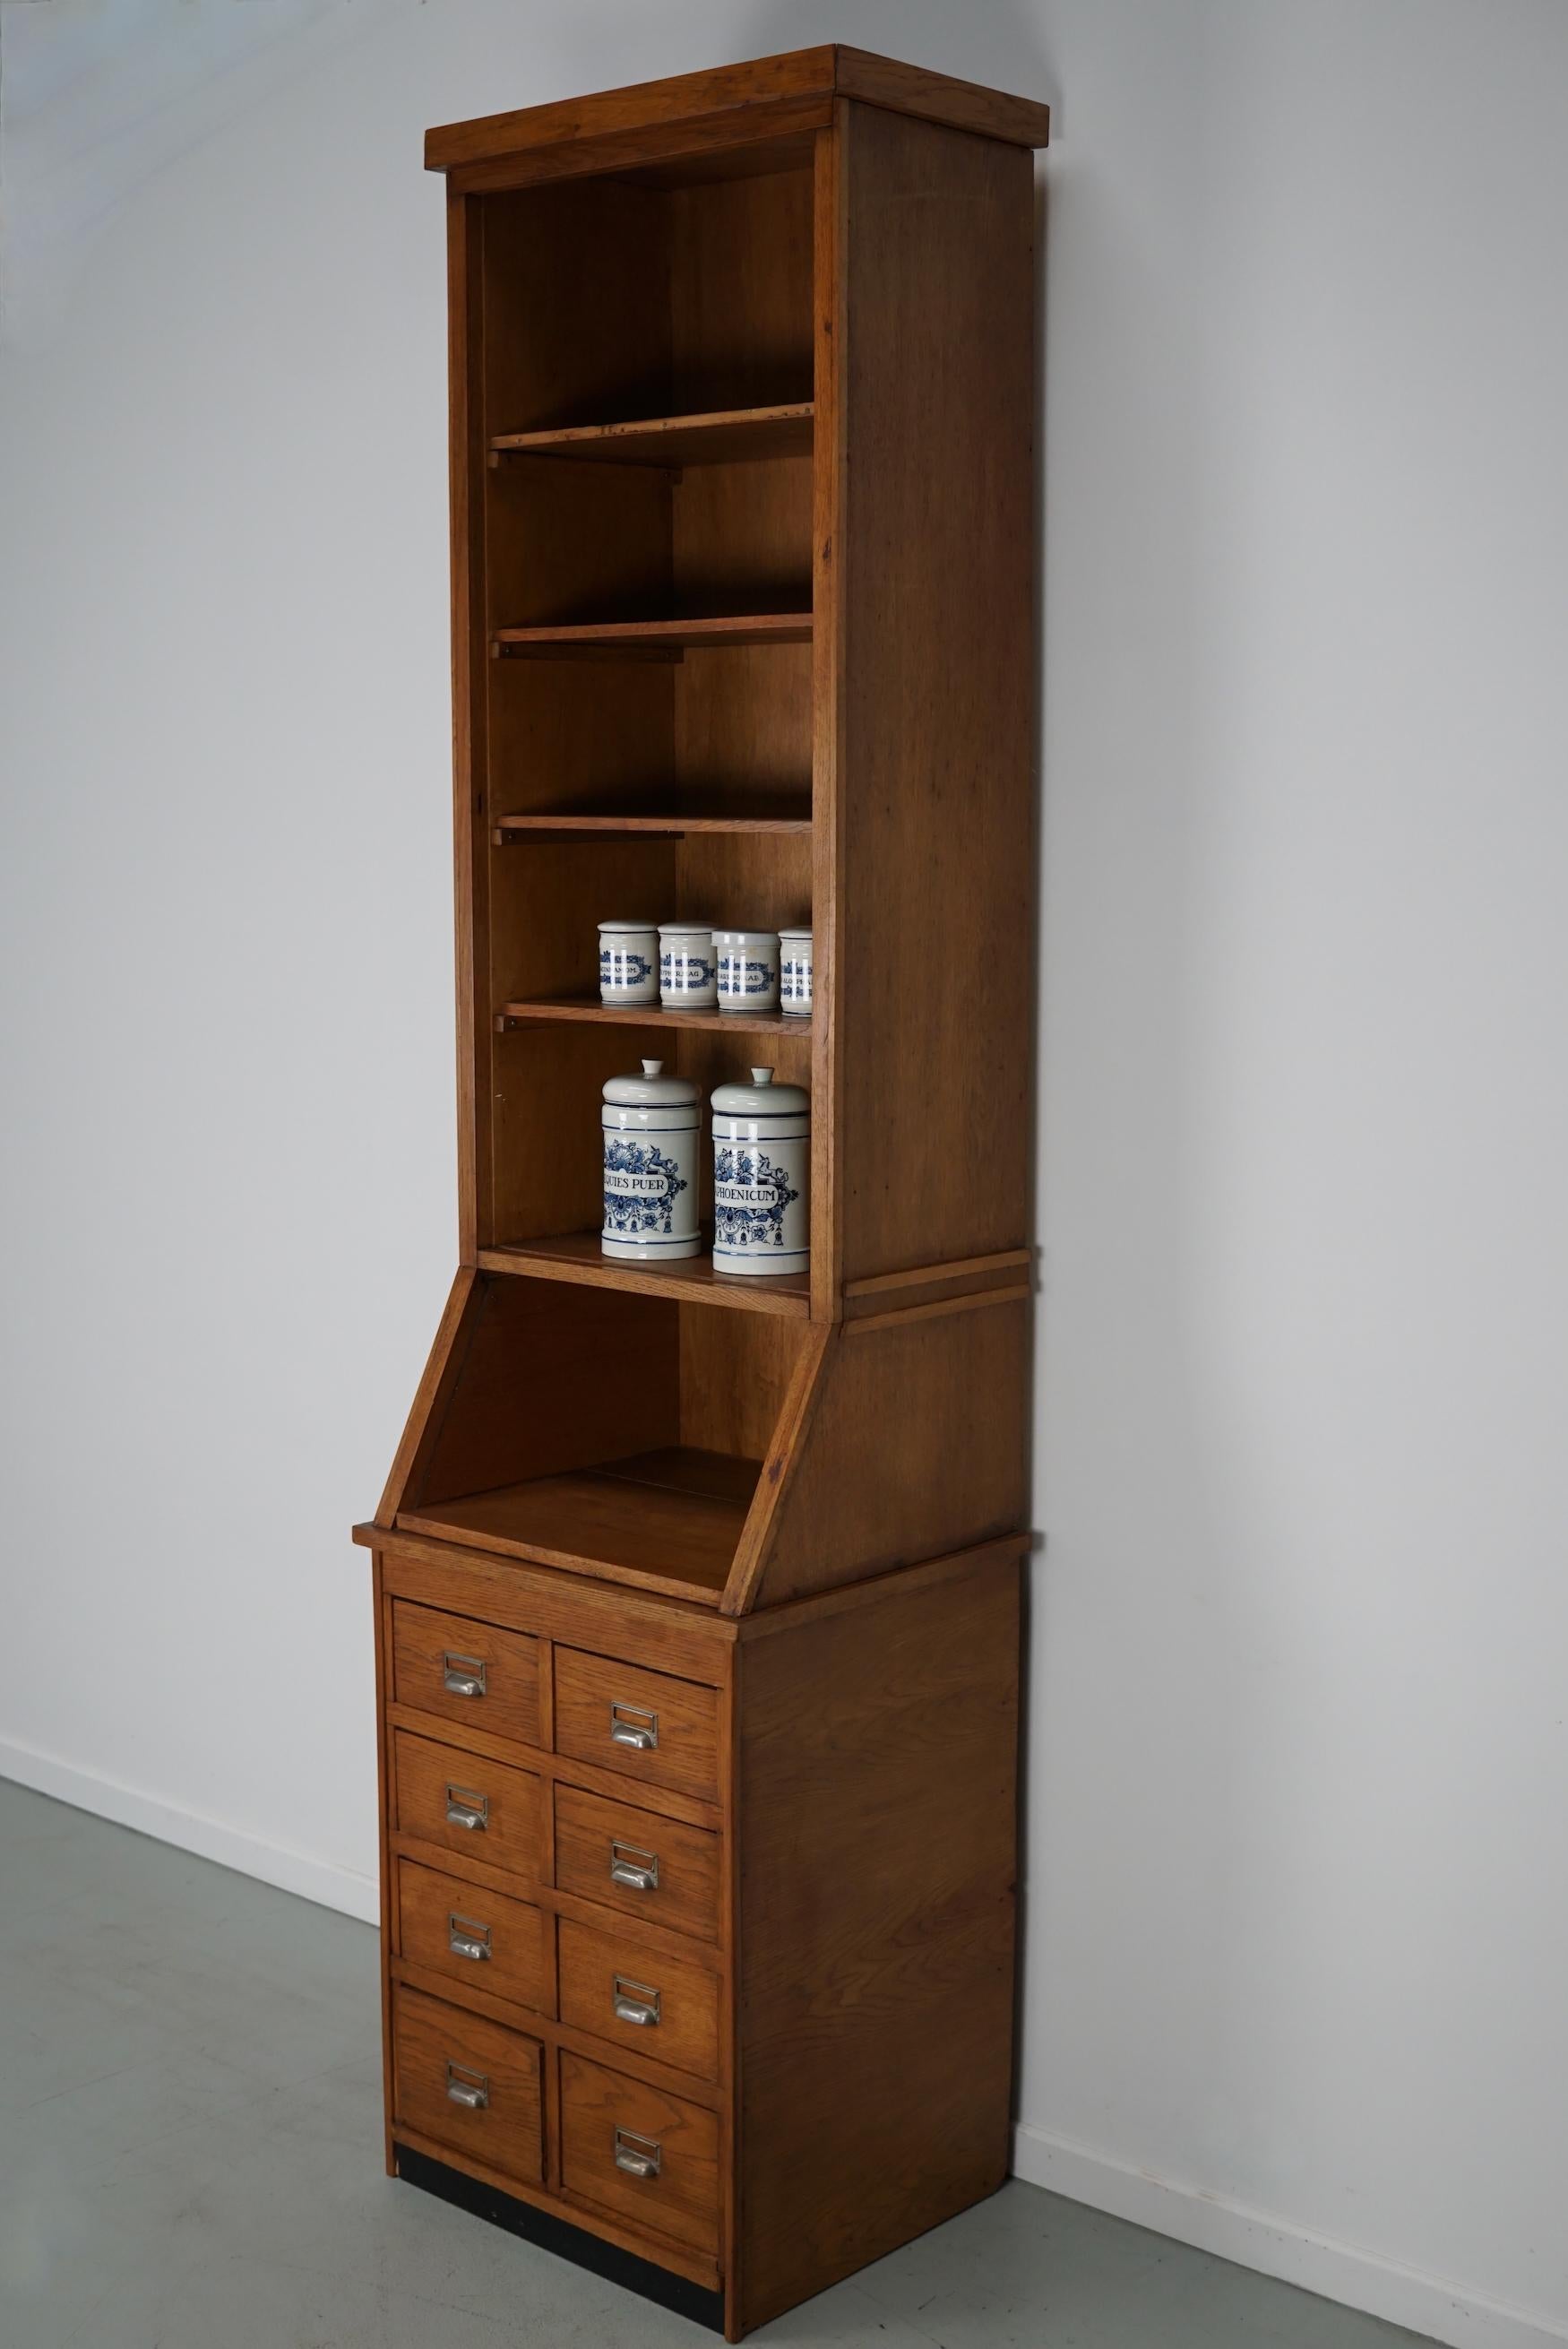 This shop cabinet was produced during the 1920/30s in the Netherlands. This piece features 8 drawers and 5 shelves and was made in two sections. It was originally used in a pharmacy in the early 20th century.